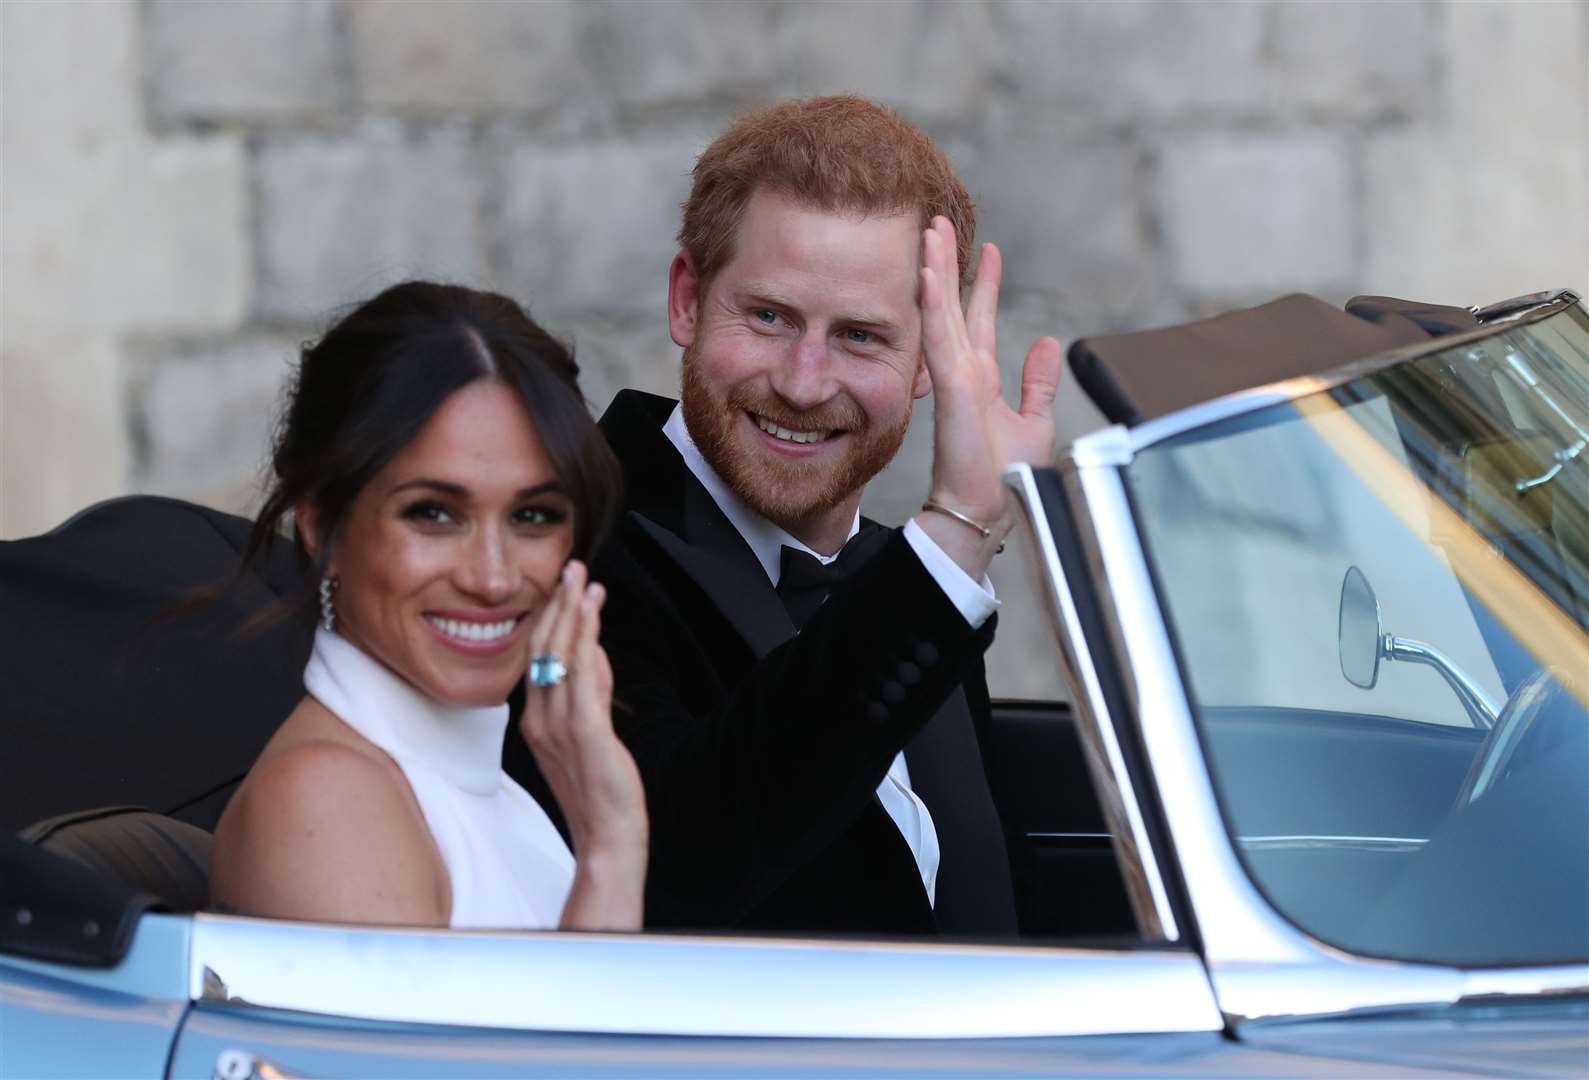 Prince Harry used the Audi for a year prior to his marriage to Meghan Markle, pictured here at their wedding in 2018. Photo credit: Steve Parsons/PA Wire